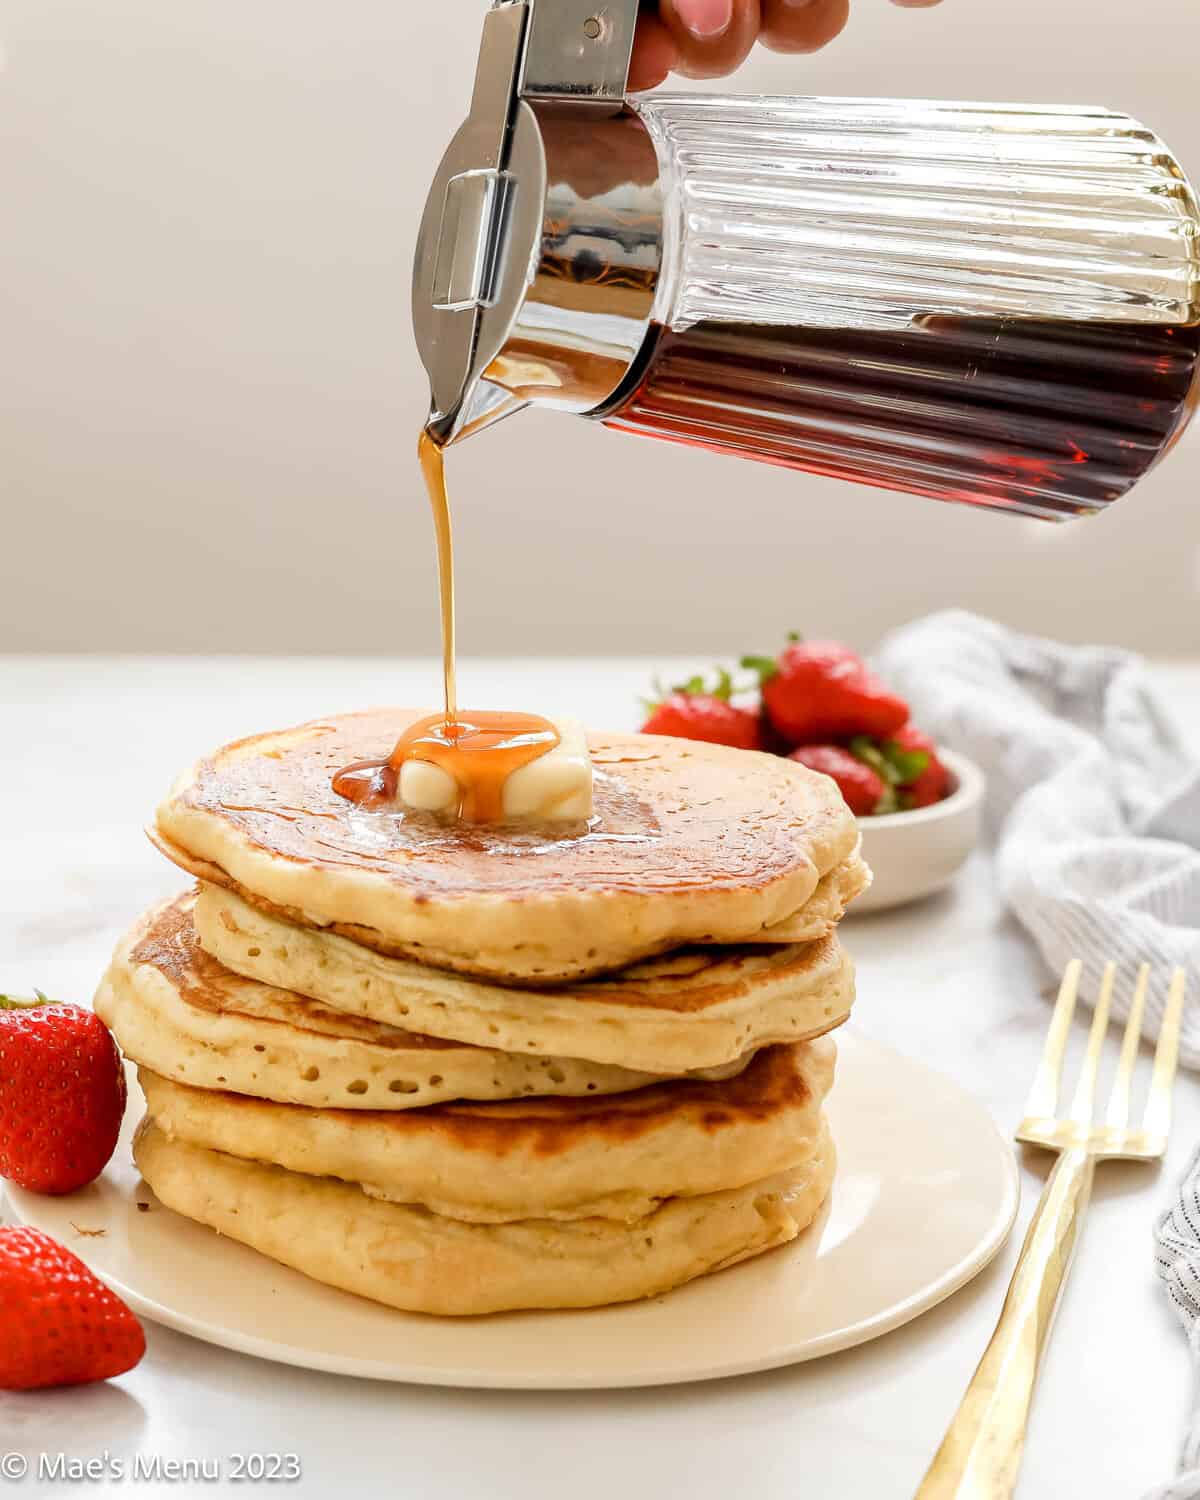 Drizzling maple syrup over a stack of fluffy buttermilk pancakes on a plate with strawberries.